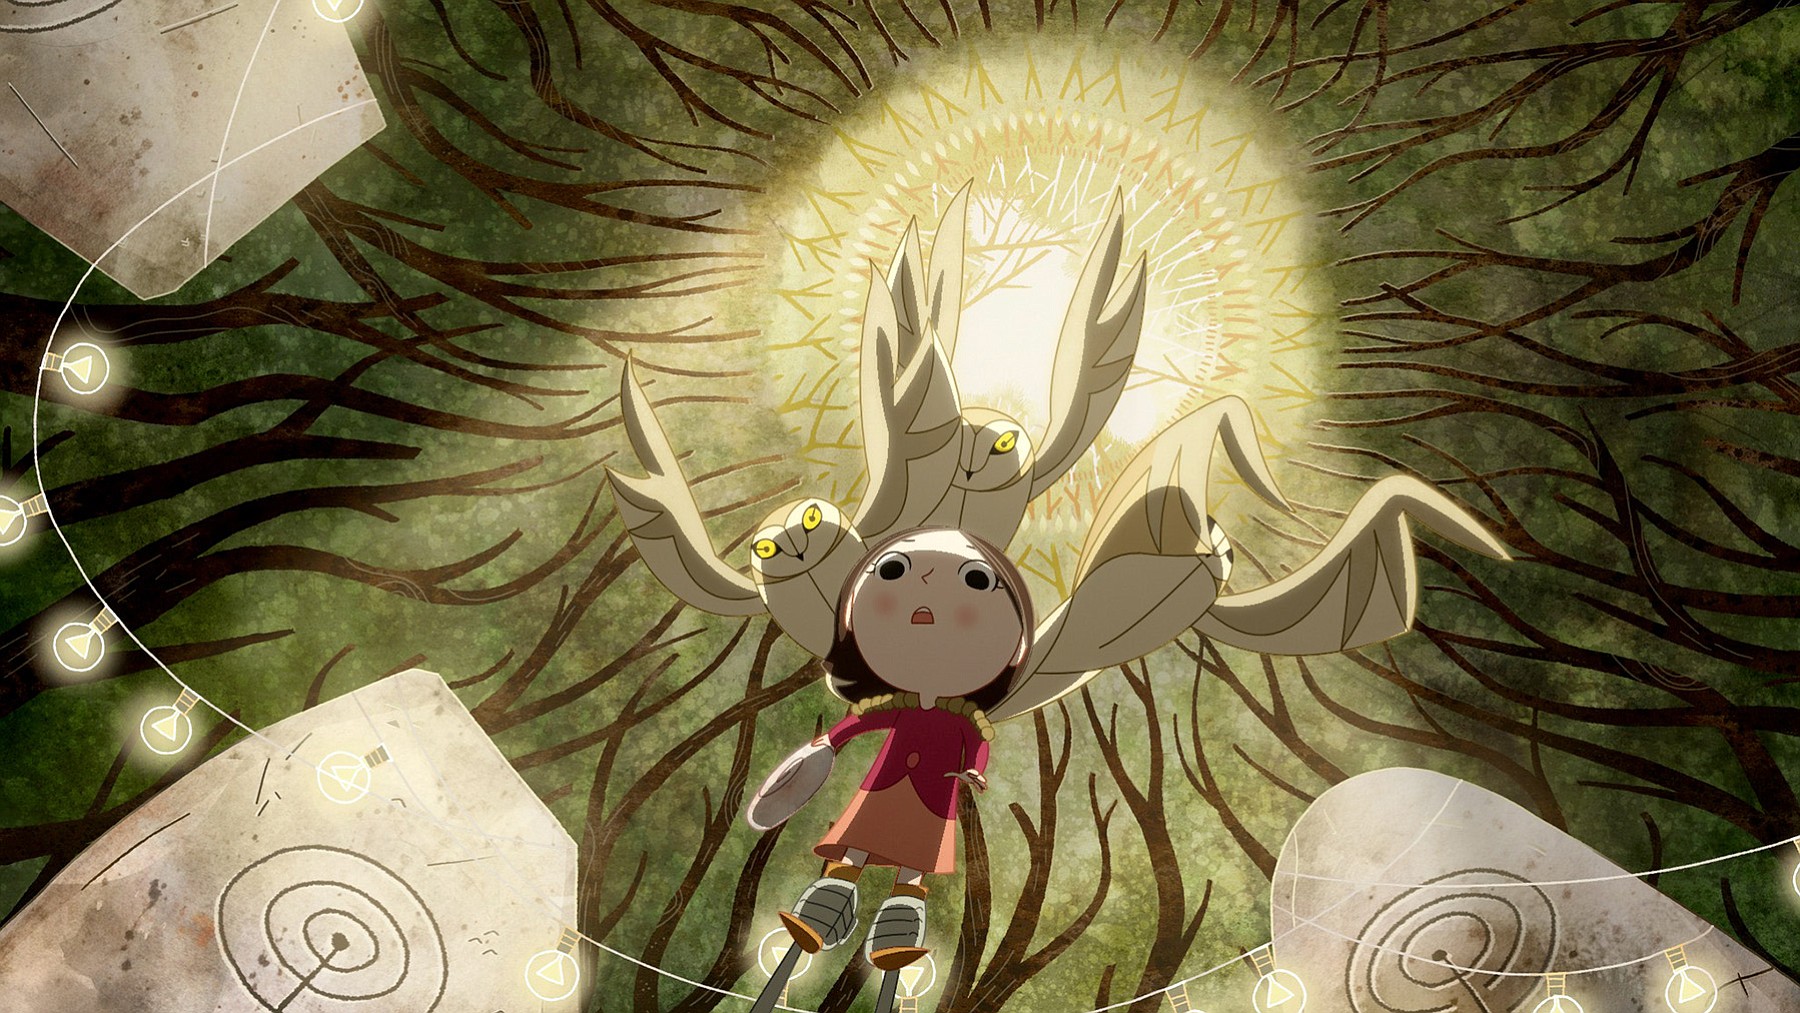 The animated Irish film &quot;Song of the Sea&quot; tells the story of the last seal-child, Saoirse, and her brother, Ben, who go on an epic journey to save the world of magic and discover the secrets of their past.